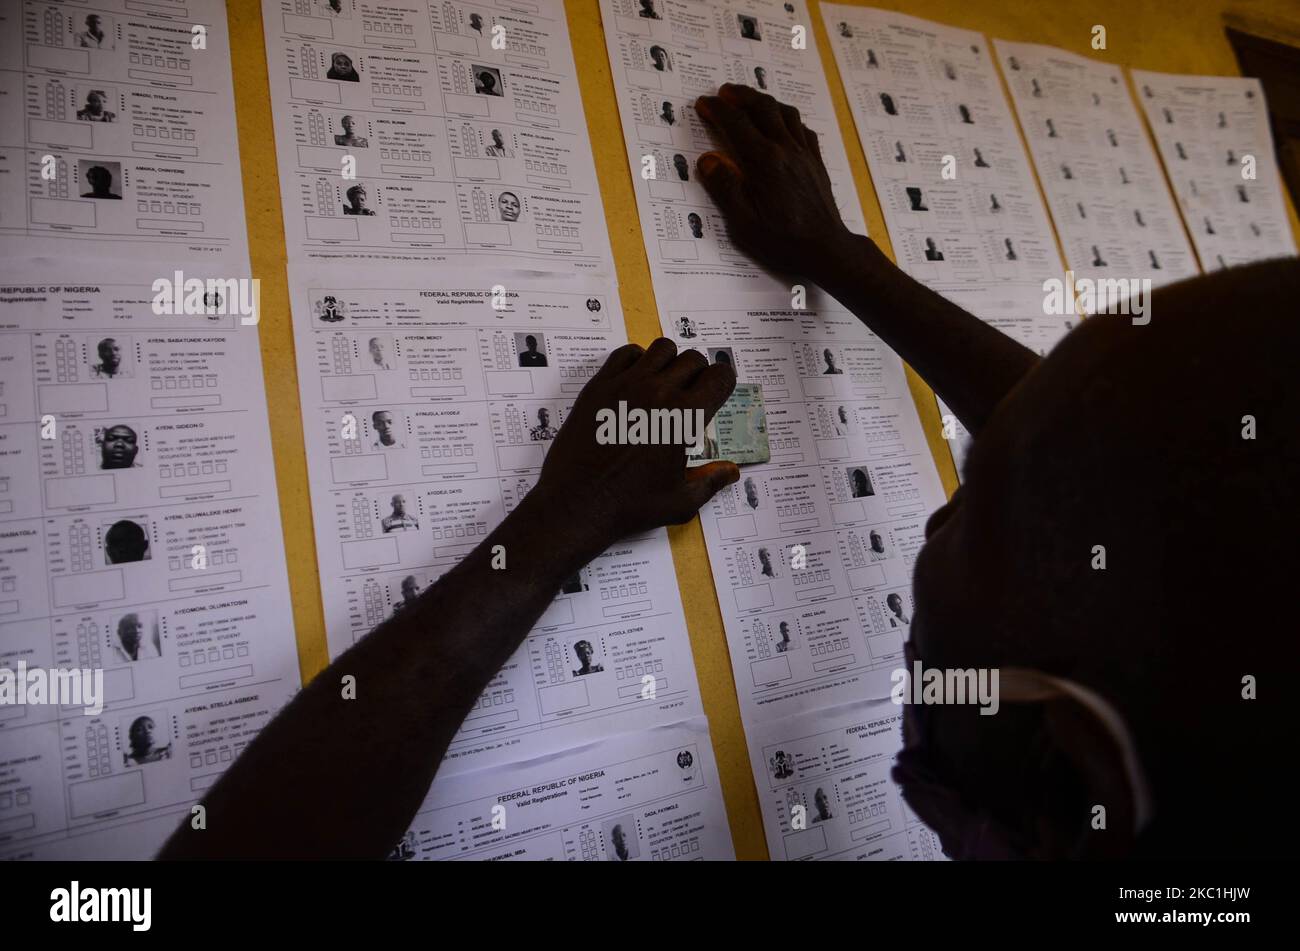 A Voter checks his name on INEC voting list at scared heart primary in schoolGbogi/Isikan, in Akure South Ondo State on October 9, 2020. (Photo by Olukayode Jaiyeola/NurPhoto) Stock Photo